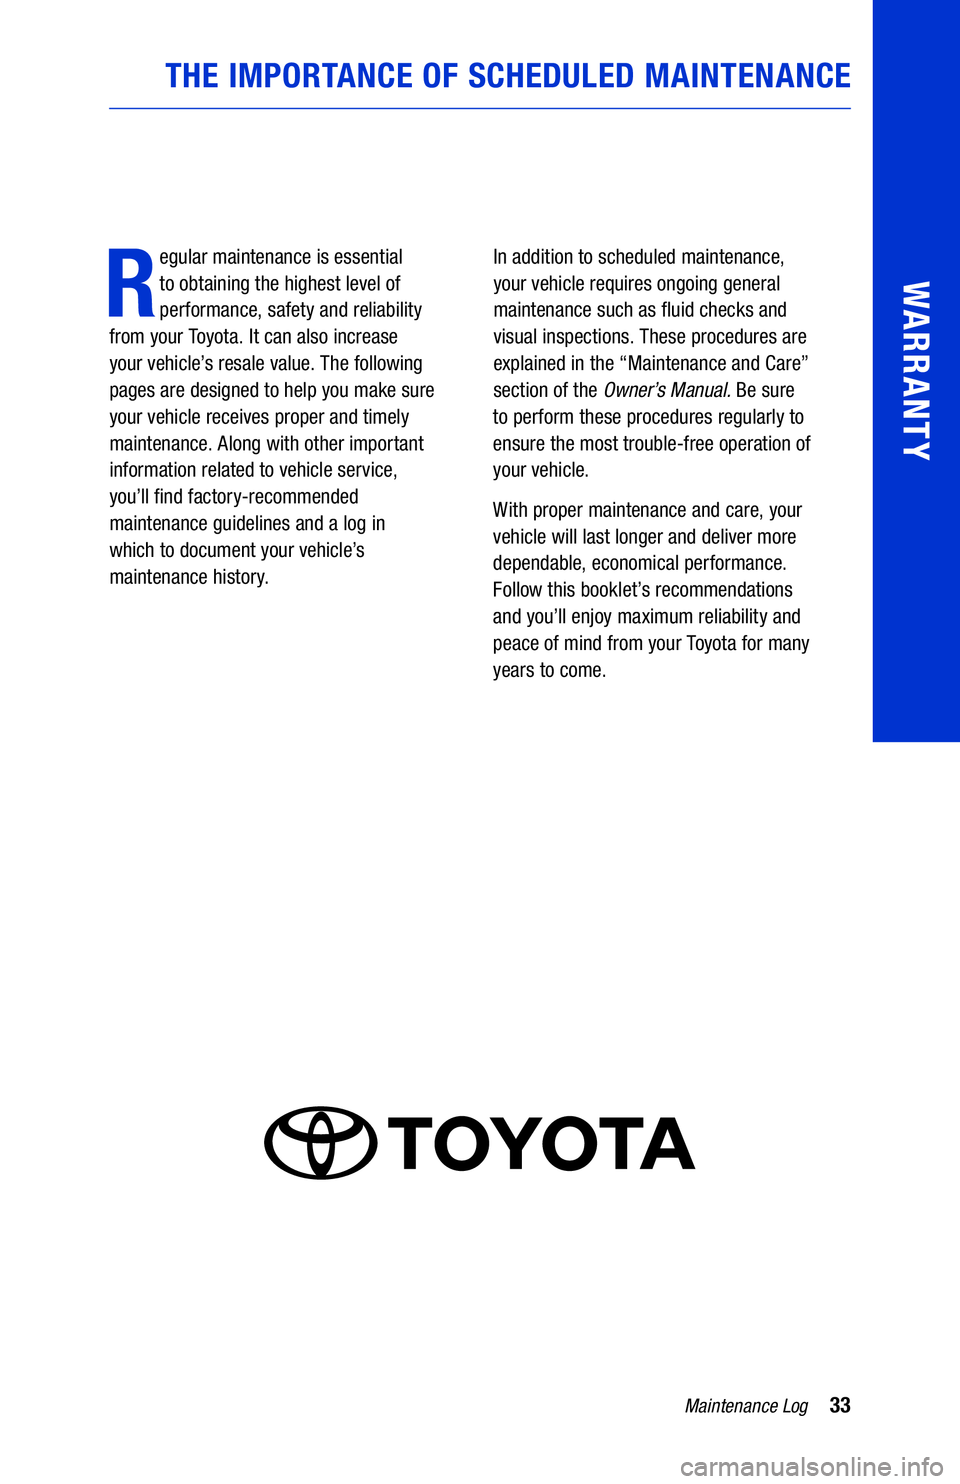 TOYOTA GT86 2019  Warranties & Maintenance Guides (in English) 33Maintenance Log
WARRANTY
THE IMPORTANCE OF SCHEDULED MAINTENANCE
R
egular maintenance is essential 
to obtaining the highest level of 
performance, safety and reliability  
from your Toyota. It can 